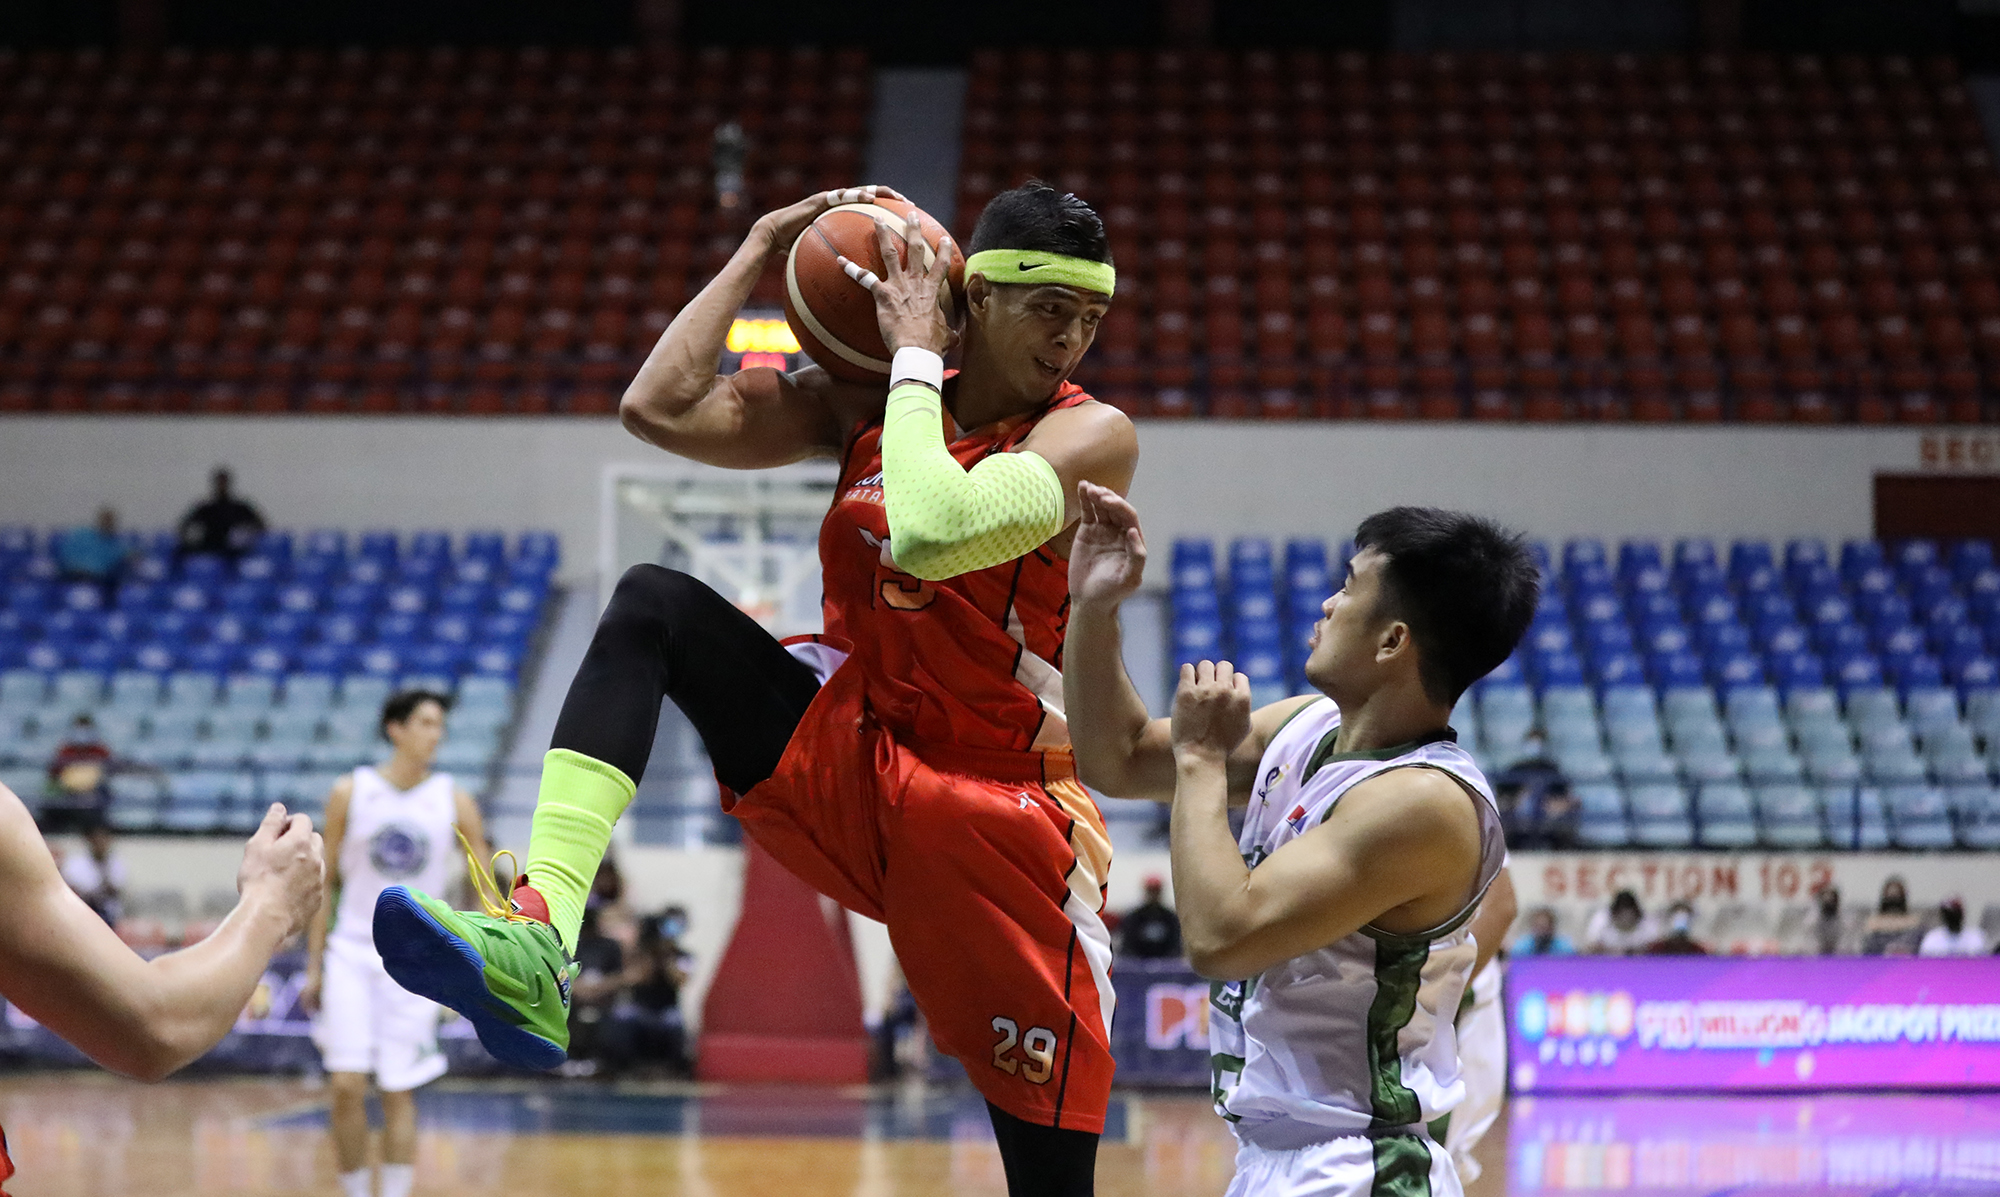 Arwind Santos has been a catalyst for NorthPort’s early success this season. —photos from PBA IMAGES